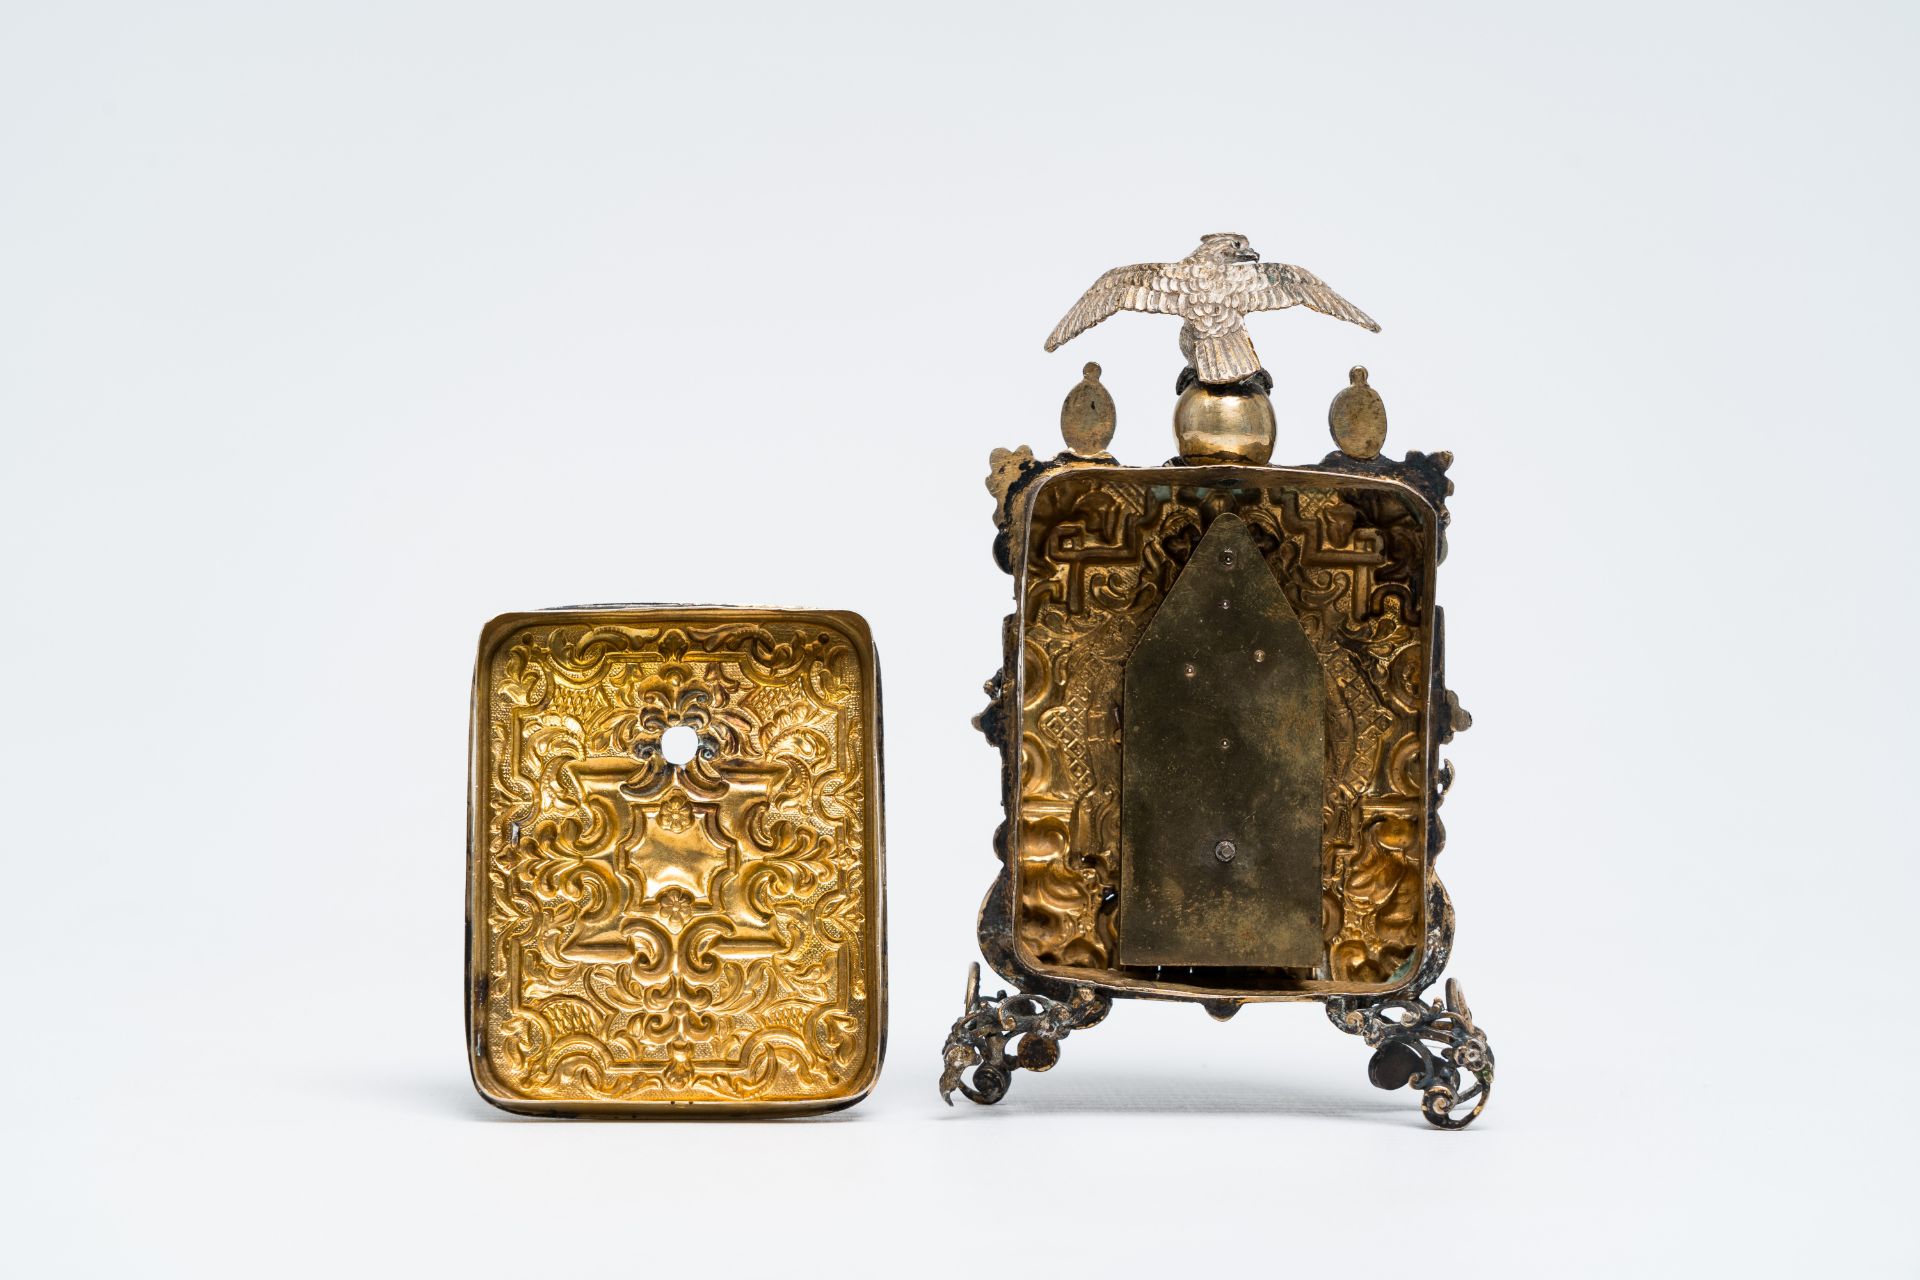 A gilt silver Baroque revival Viennese table clock crowned with an eagle and inlaid with turquoise, - Image 8 of 11